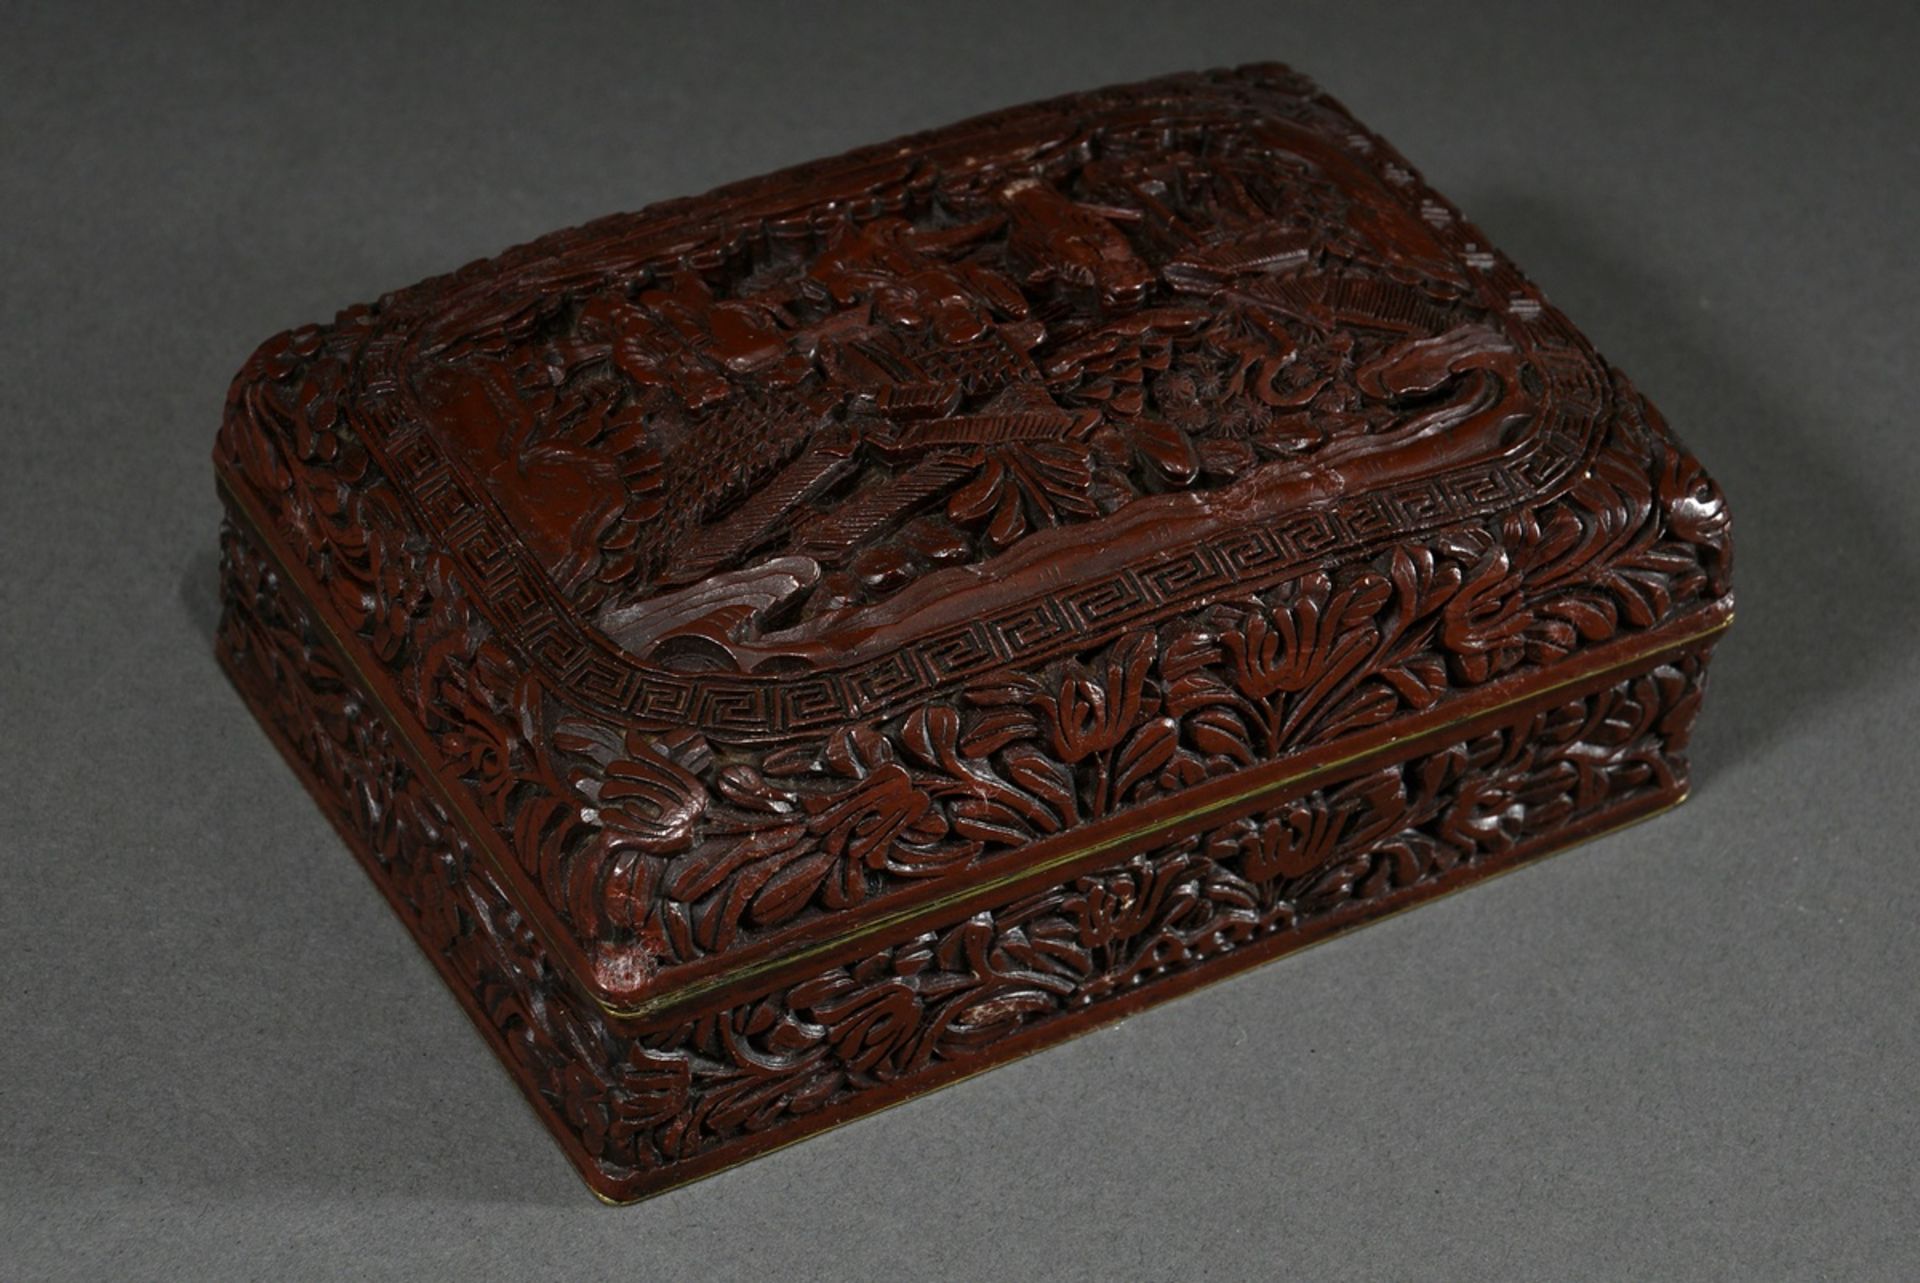 4 Various red carved lacquer objects: small round paper mache lidded box "Three playing children" ( - Image 16 of 19